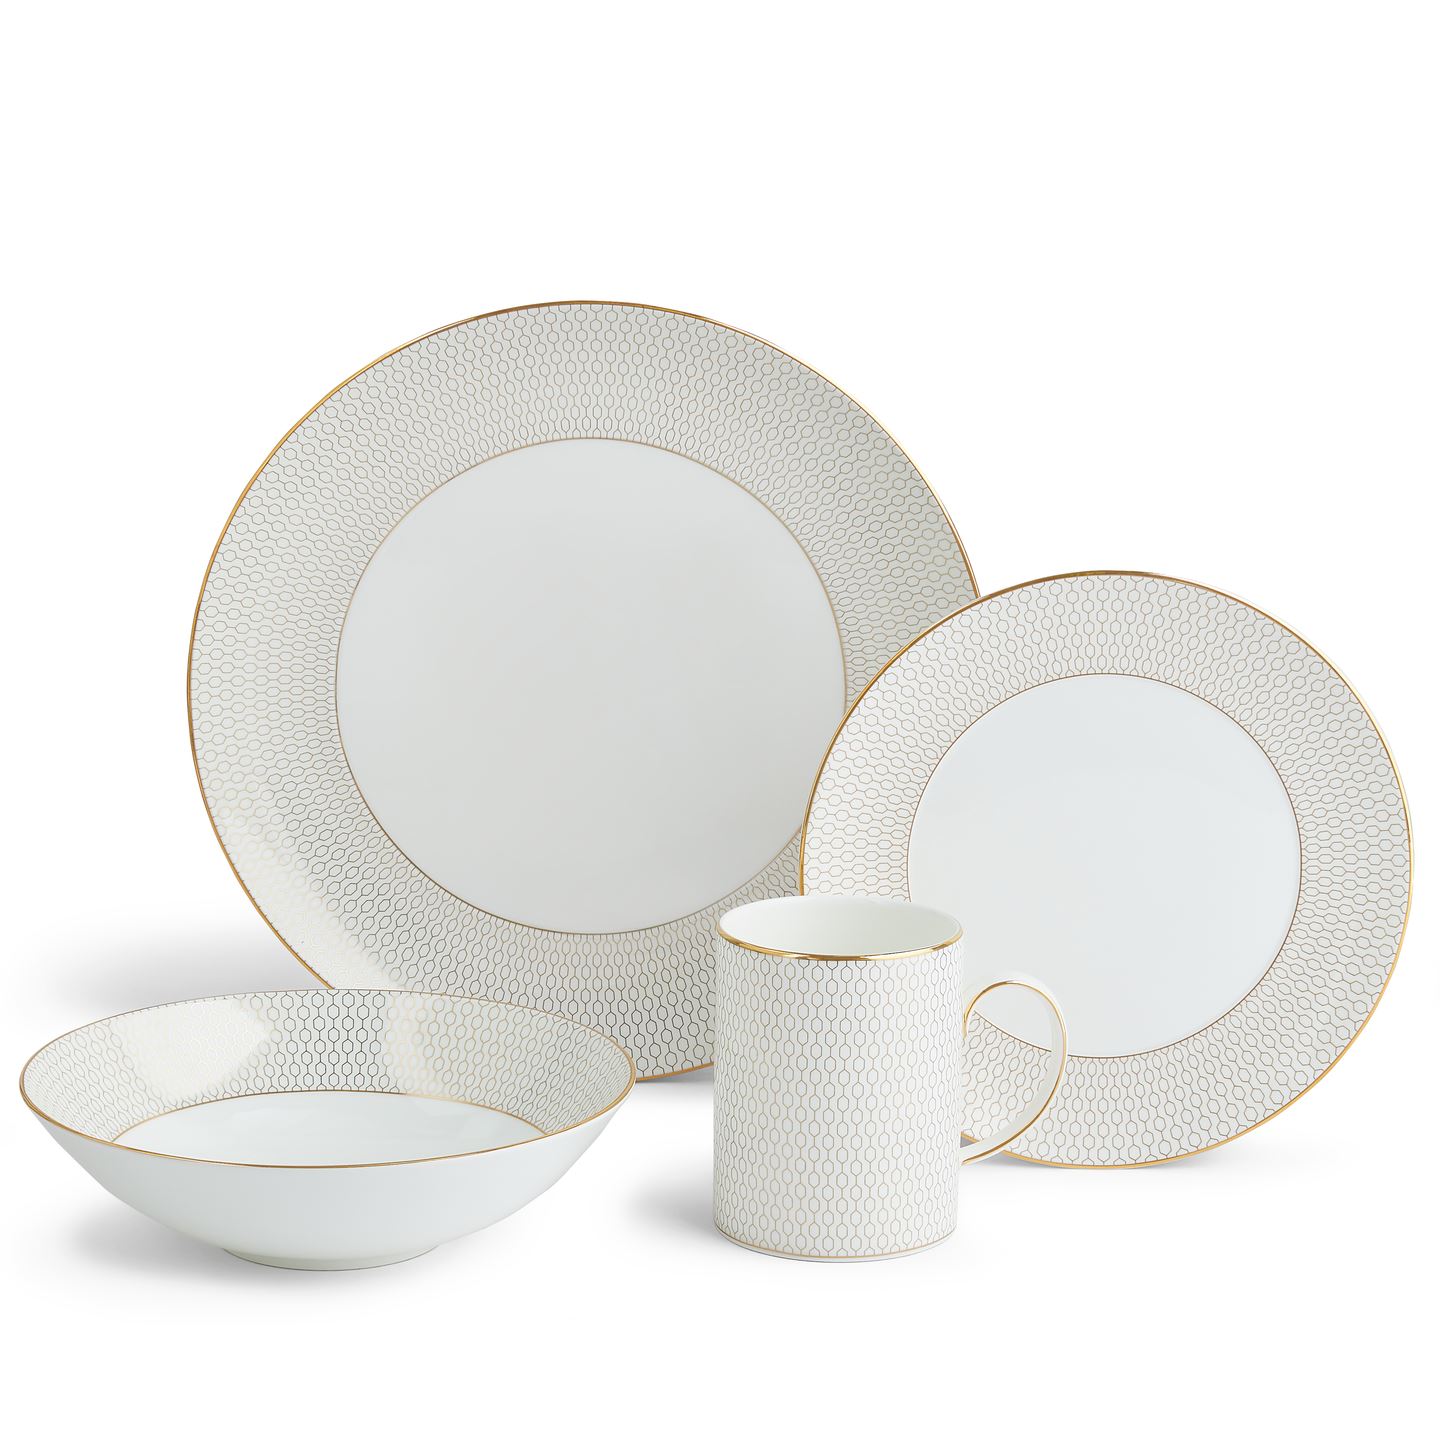 Vera Wang Wedgwood Grosgrain 5-Piece Place Setting, Service for by Wedgwood - 1